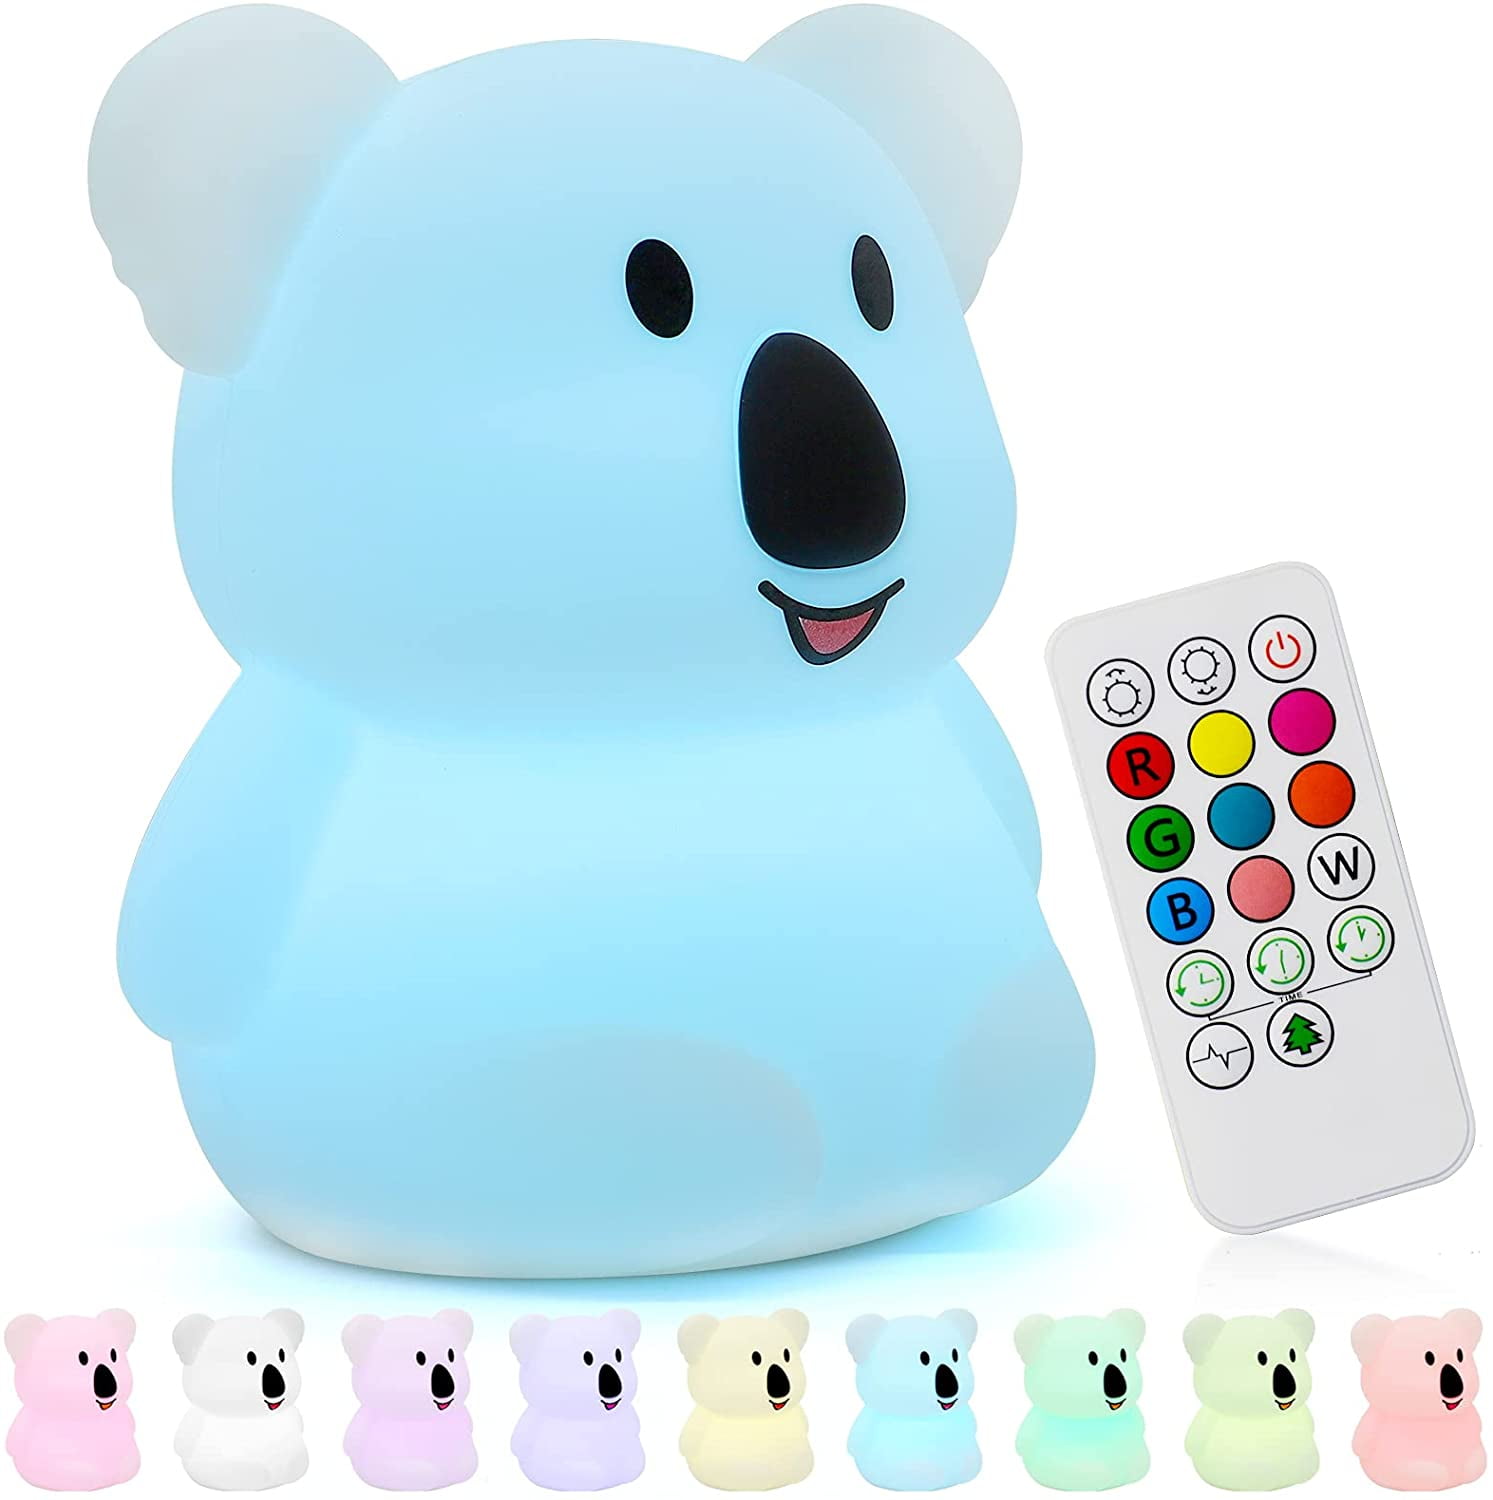 FANT.LUX Bear Nightlights Cute Animal Nursery Touch Silicone Baby Multicolor LED Nightlight Portable and Rechargeable Infant or Toddler Bright Besides Lamp for Bedroom Night Light for Kids 